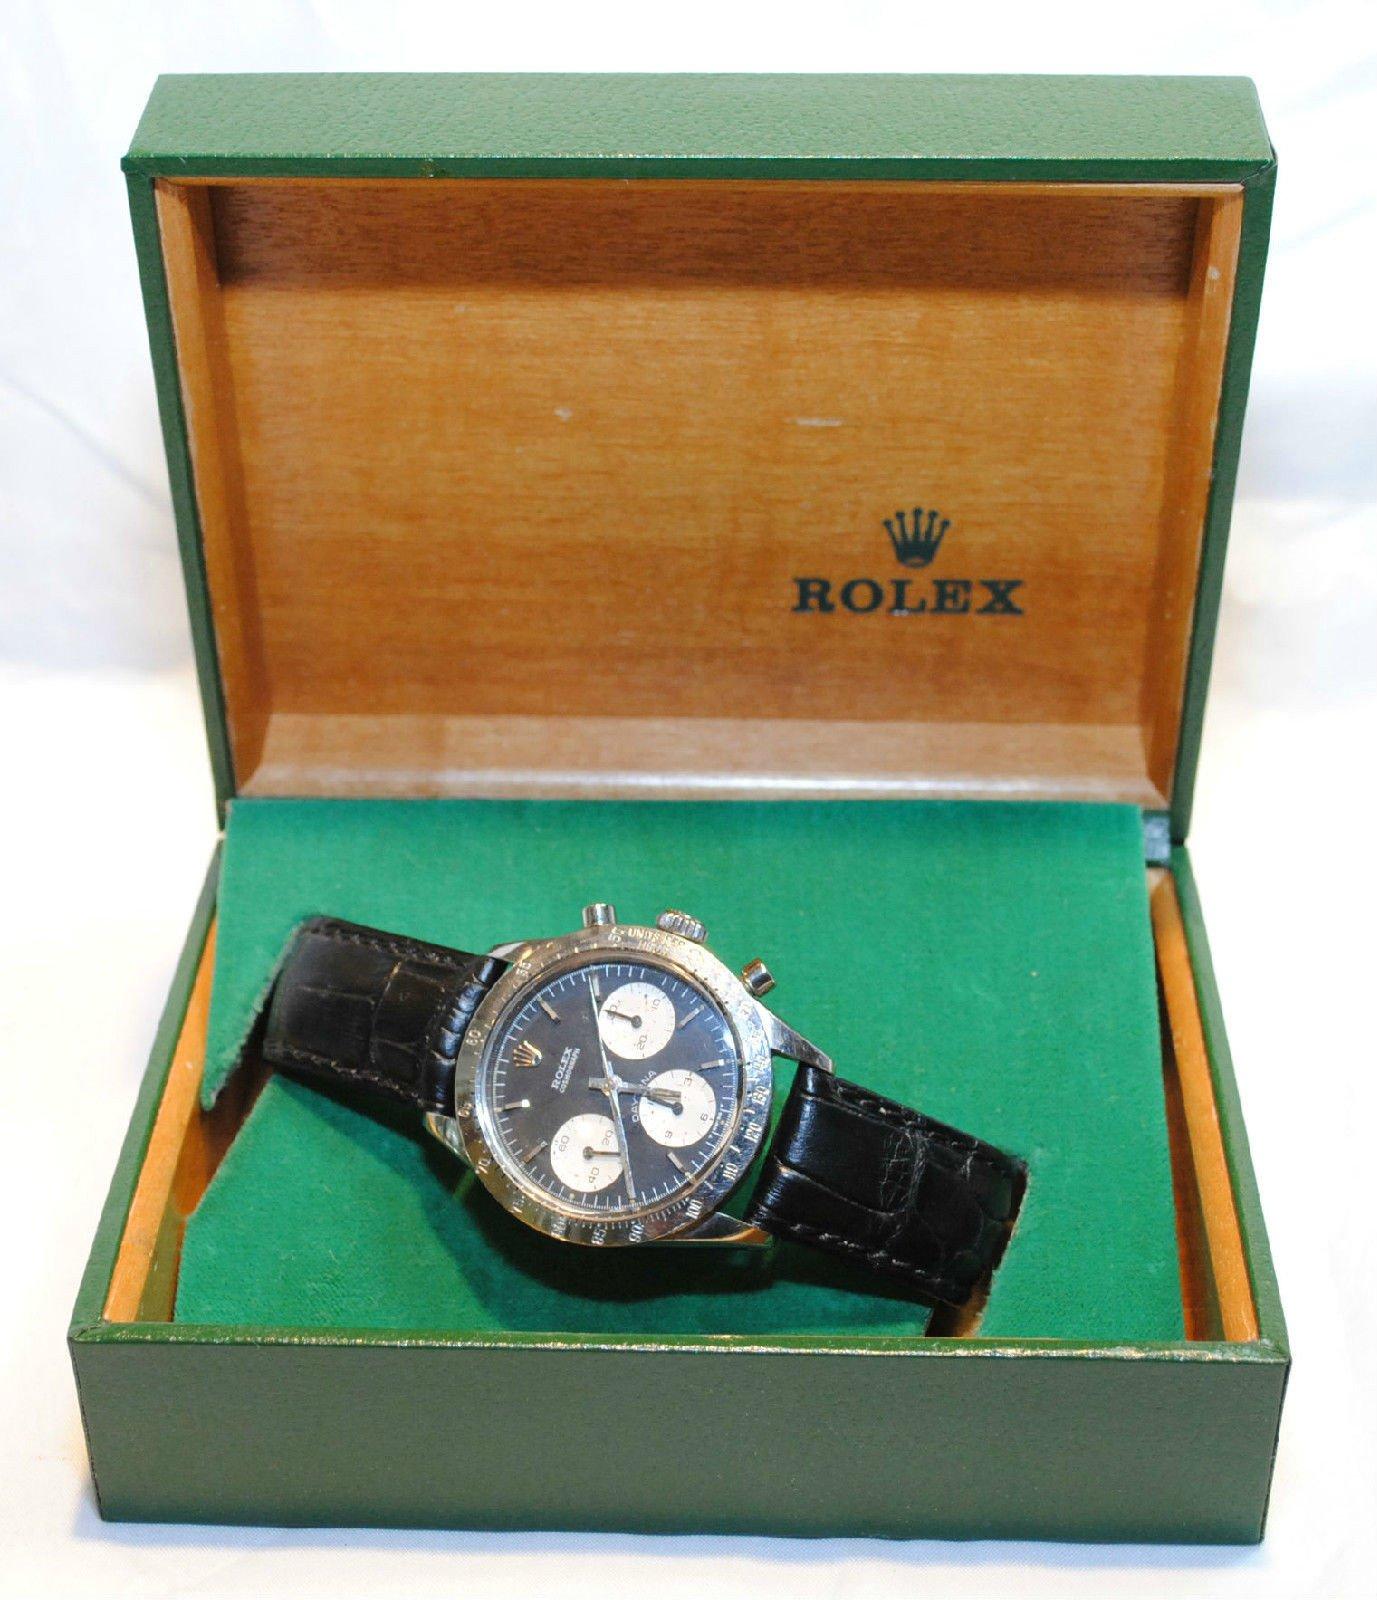 ROLEX VINTAGE 1969 DAYTONA COSMOGRAPH WRISTWATCH IN STAINLESS STEEL WITH BLACK DIAL & 3 SILVER SUBDIALS

ITEM DESCRIPTION: 
With Swiss construction and Rolex distinction, this Daytona Cosmograph watch keeps time as impeccable as its style. This